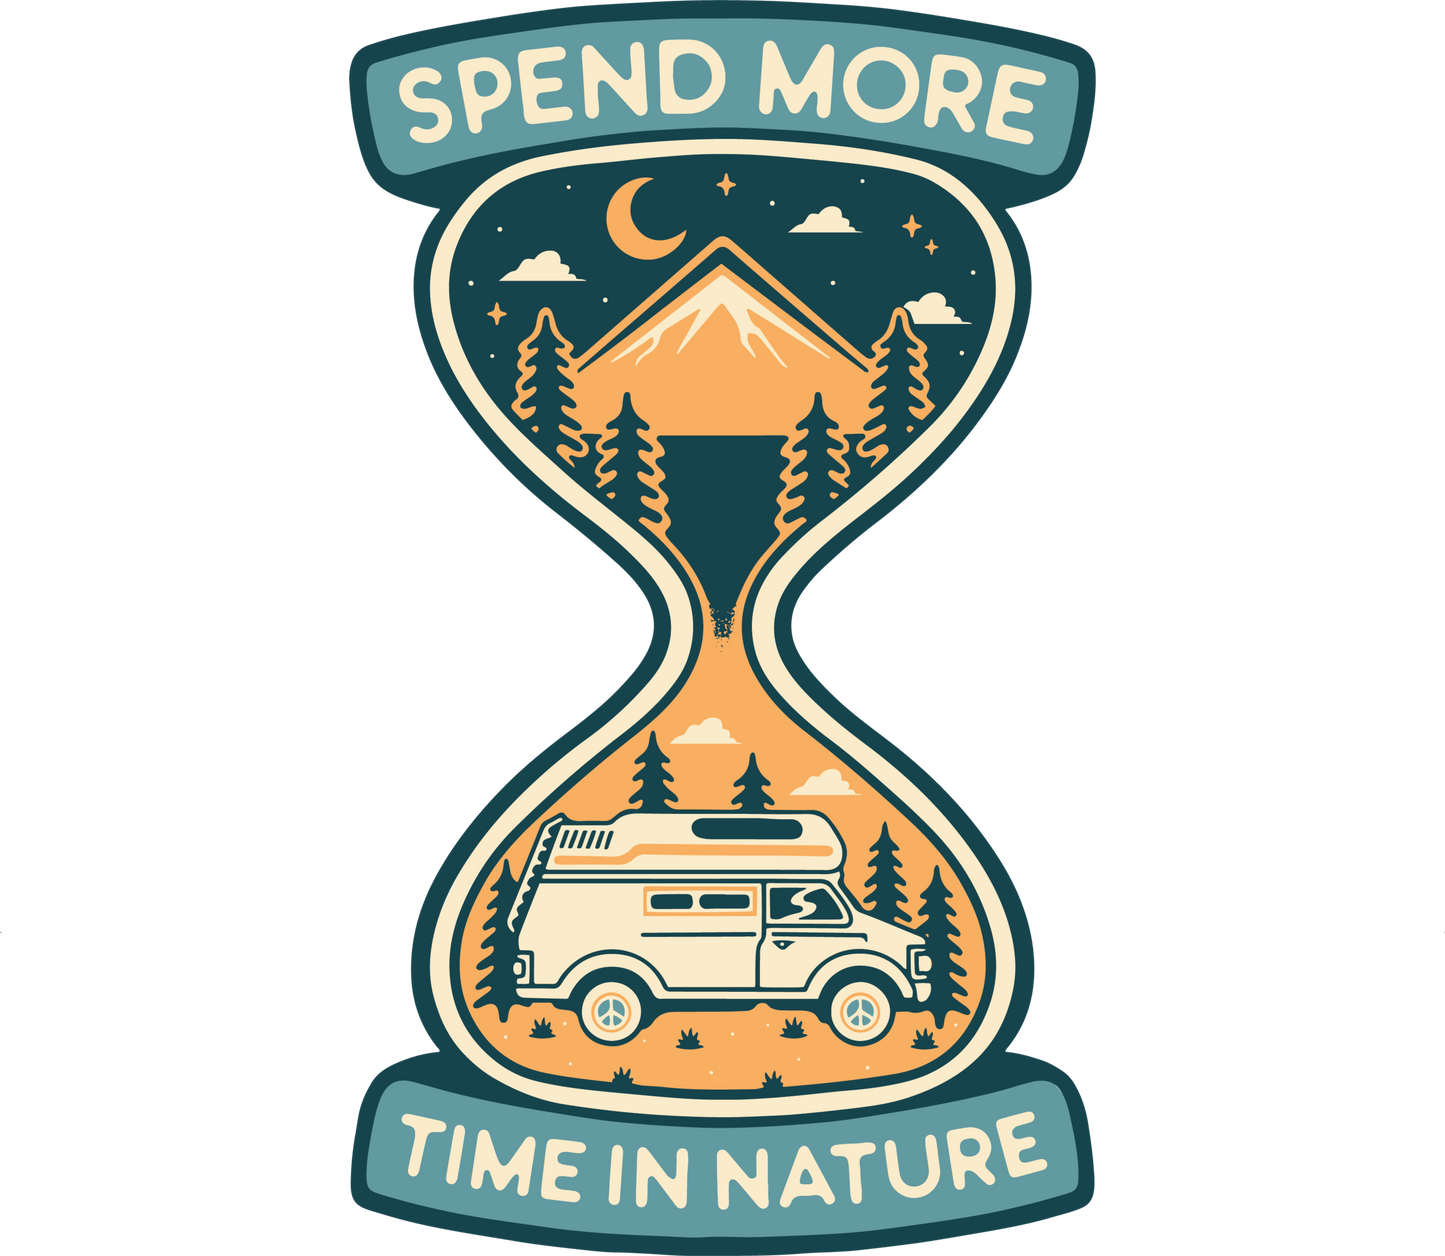 Spend More Time in Nature